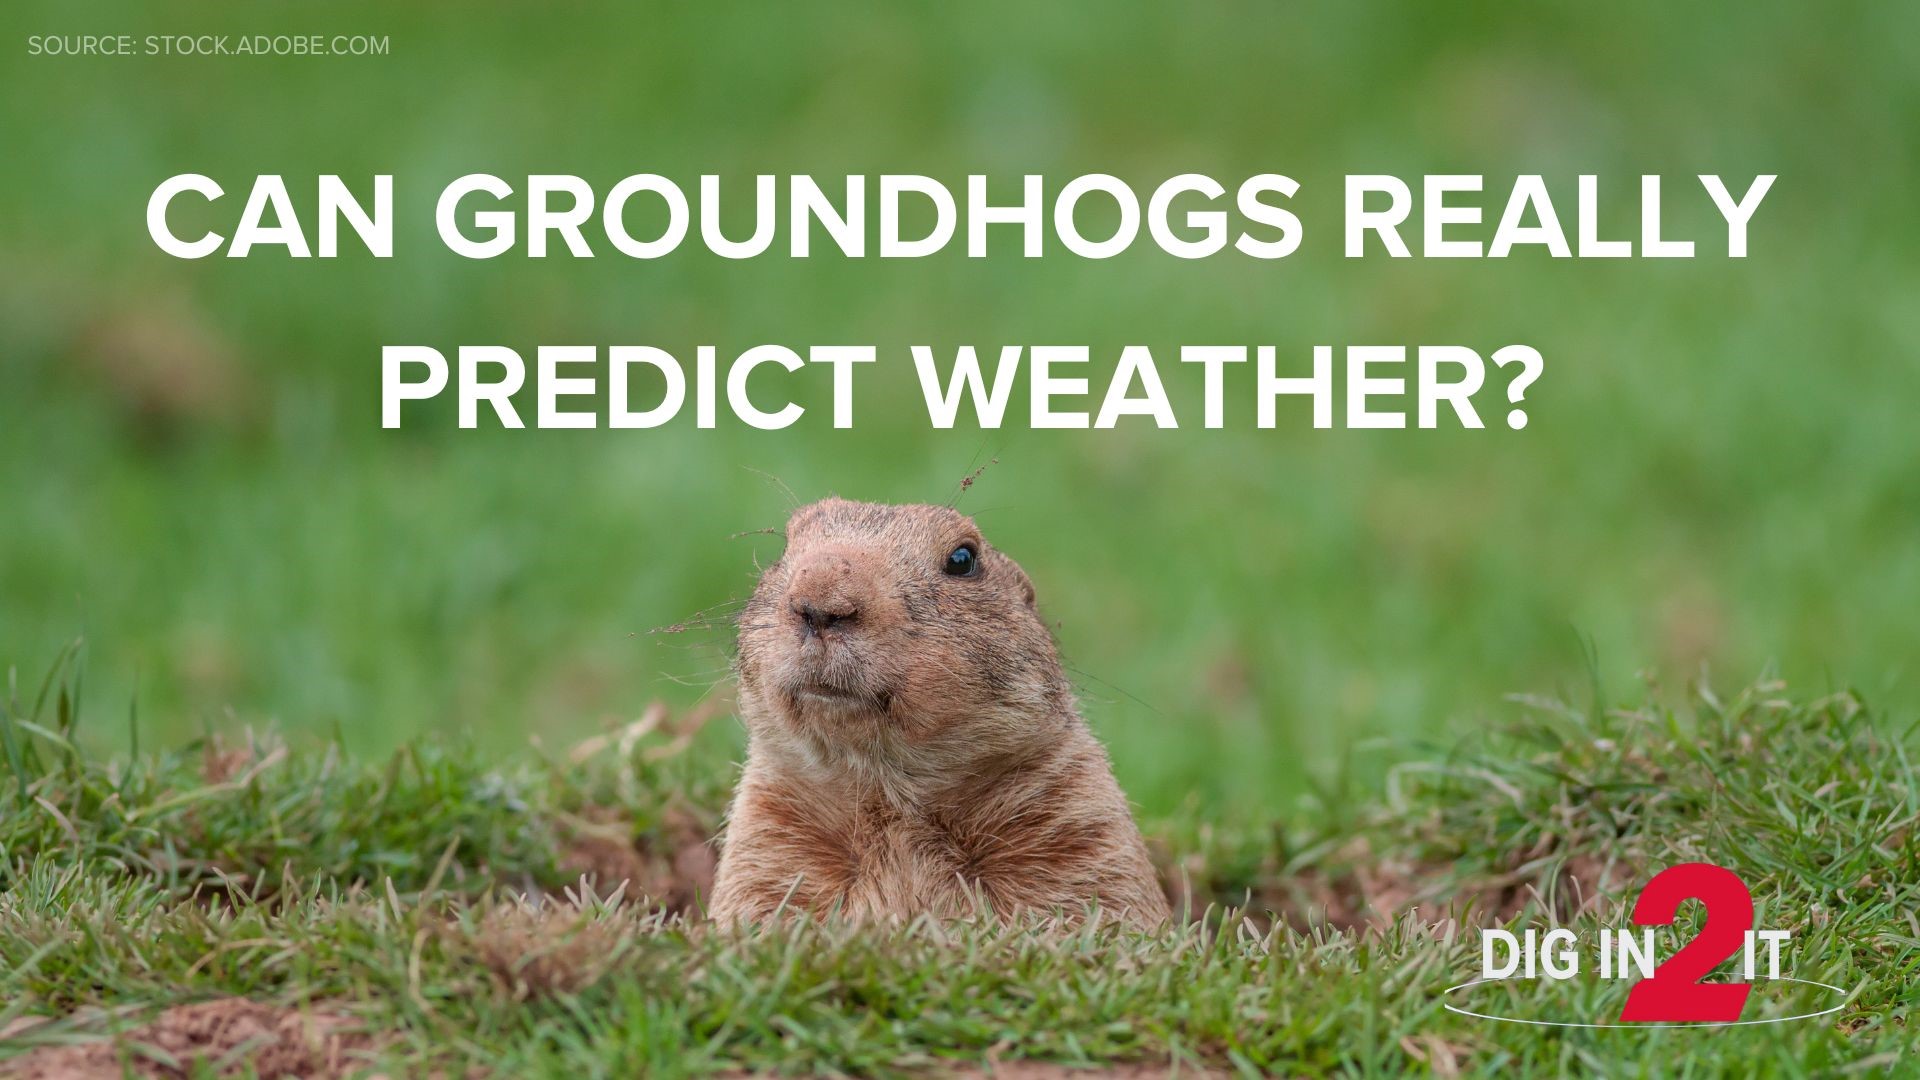 Don't let this rodent's prediction convince you of the future forecast, the NOAA says he's only right half of the time.